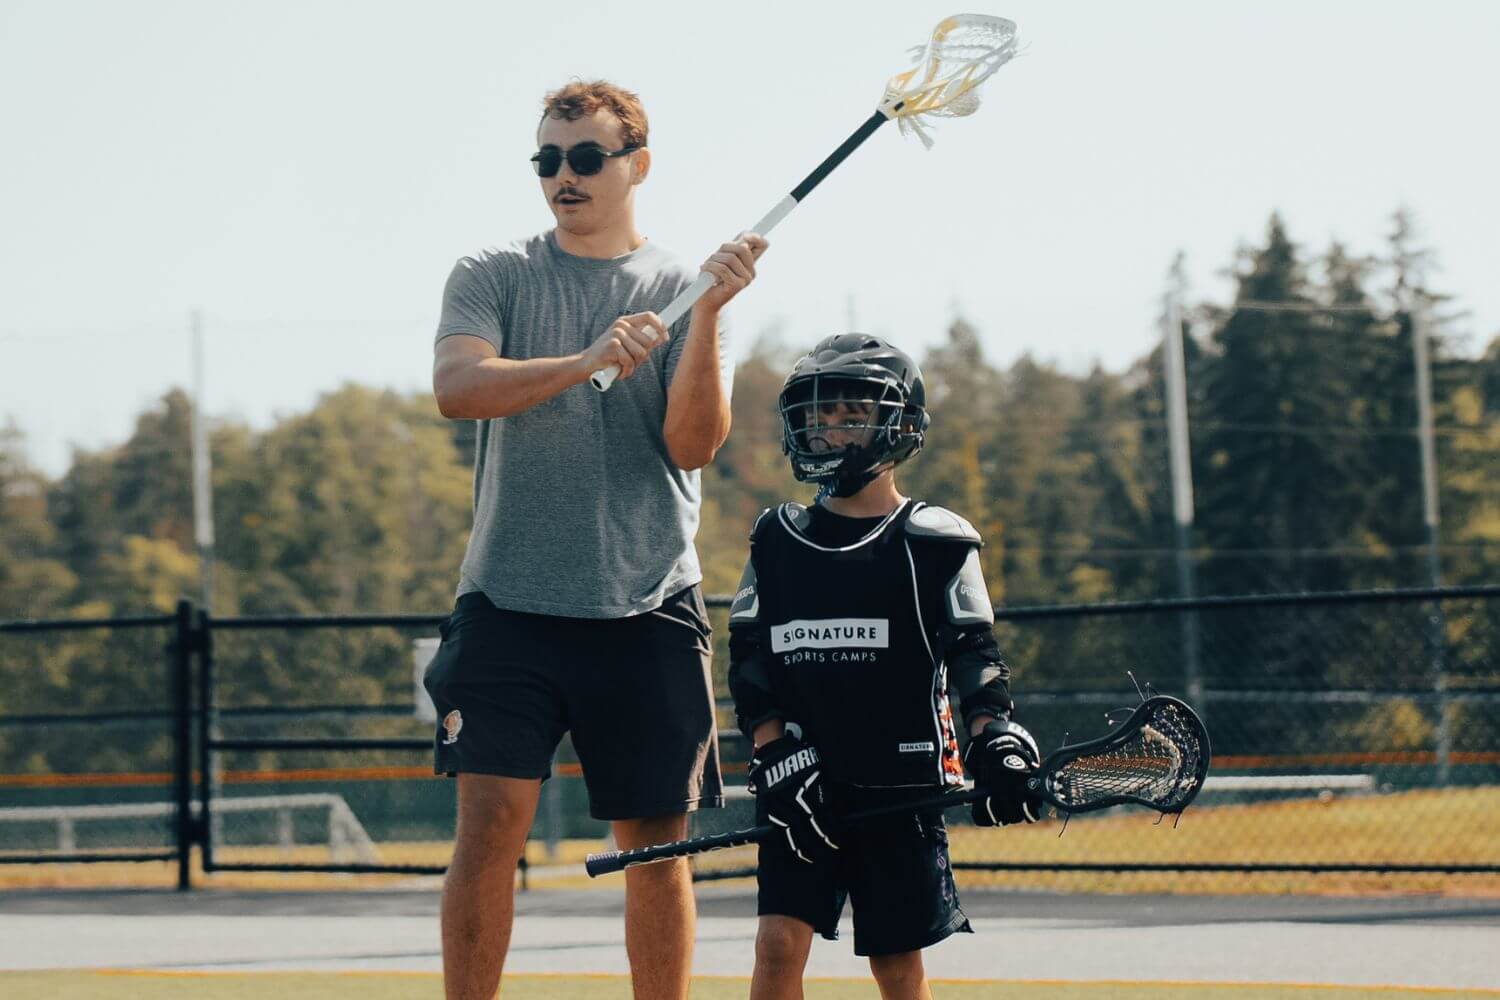 Professional lacrosse player giving one on one instruction to a young player